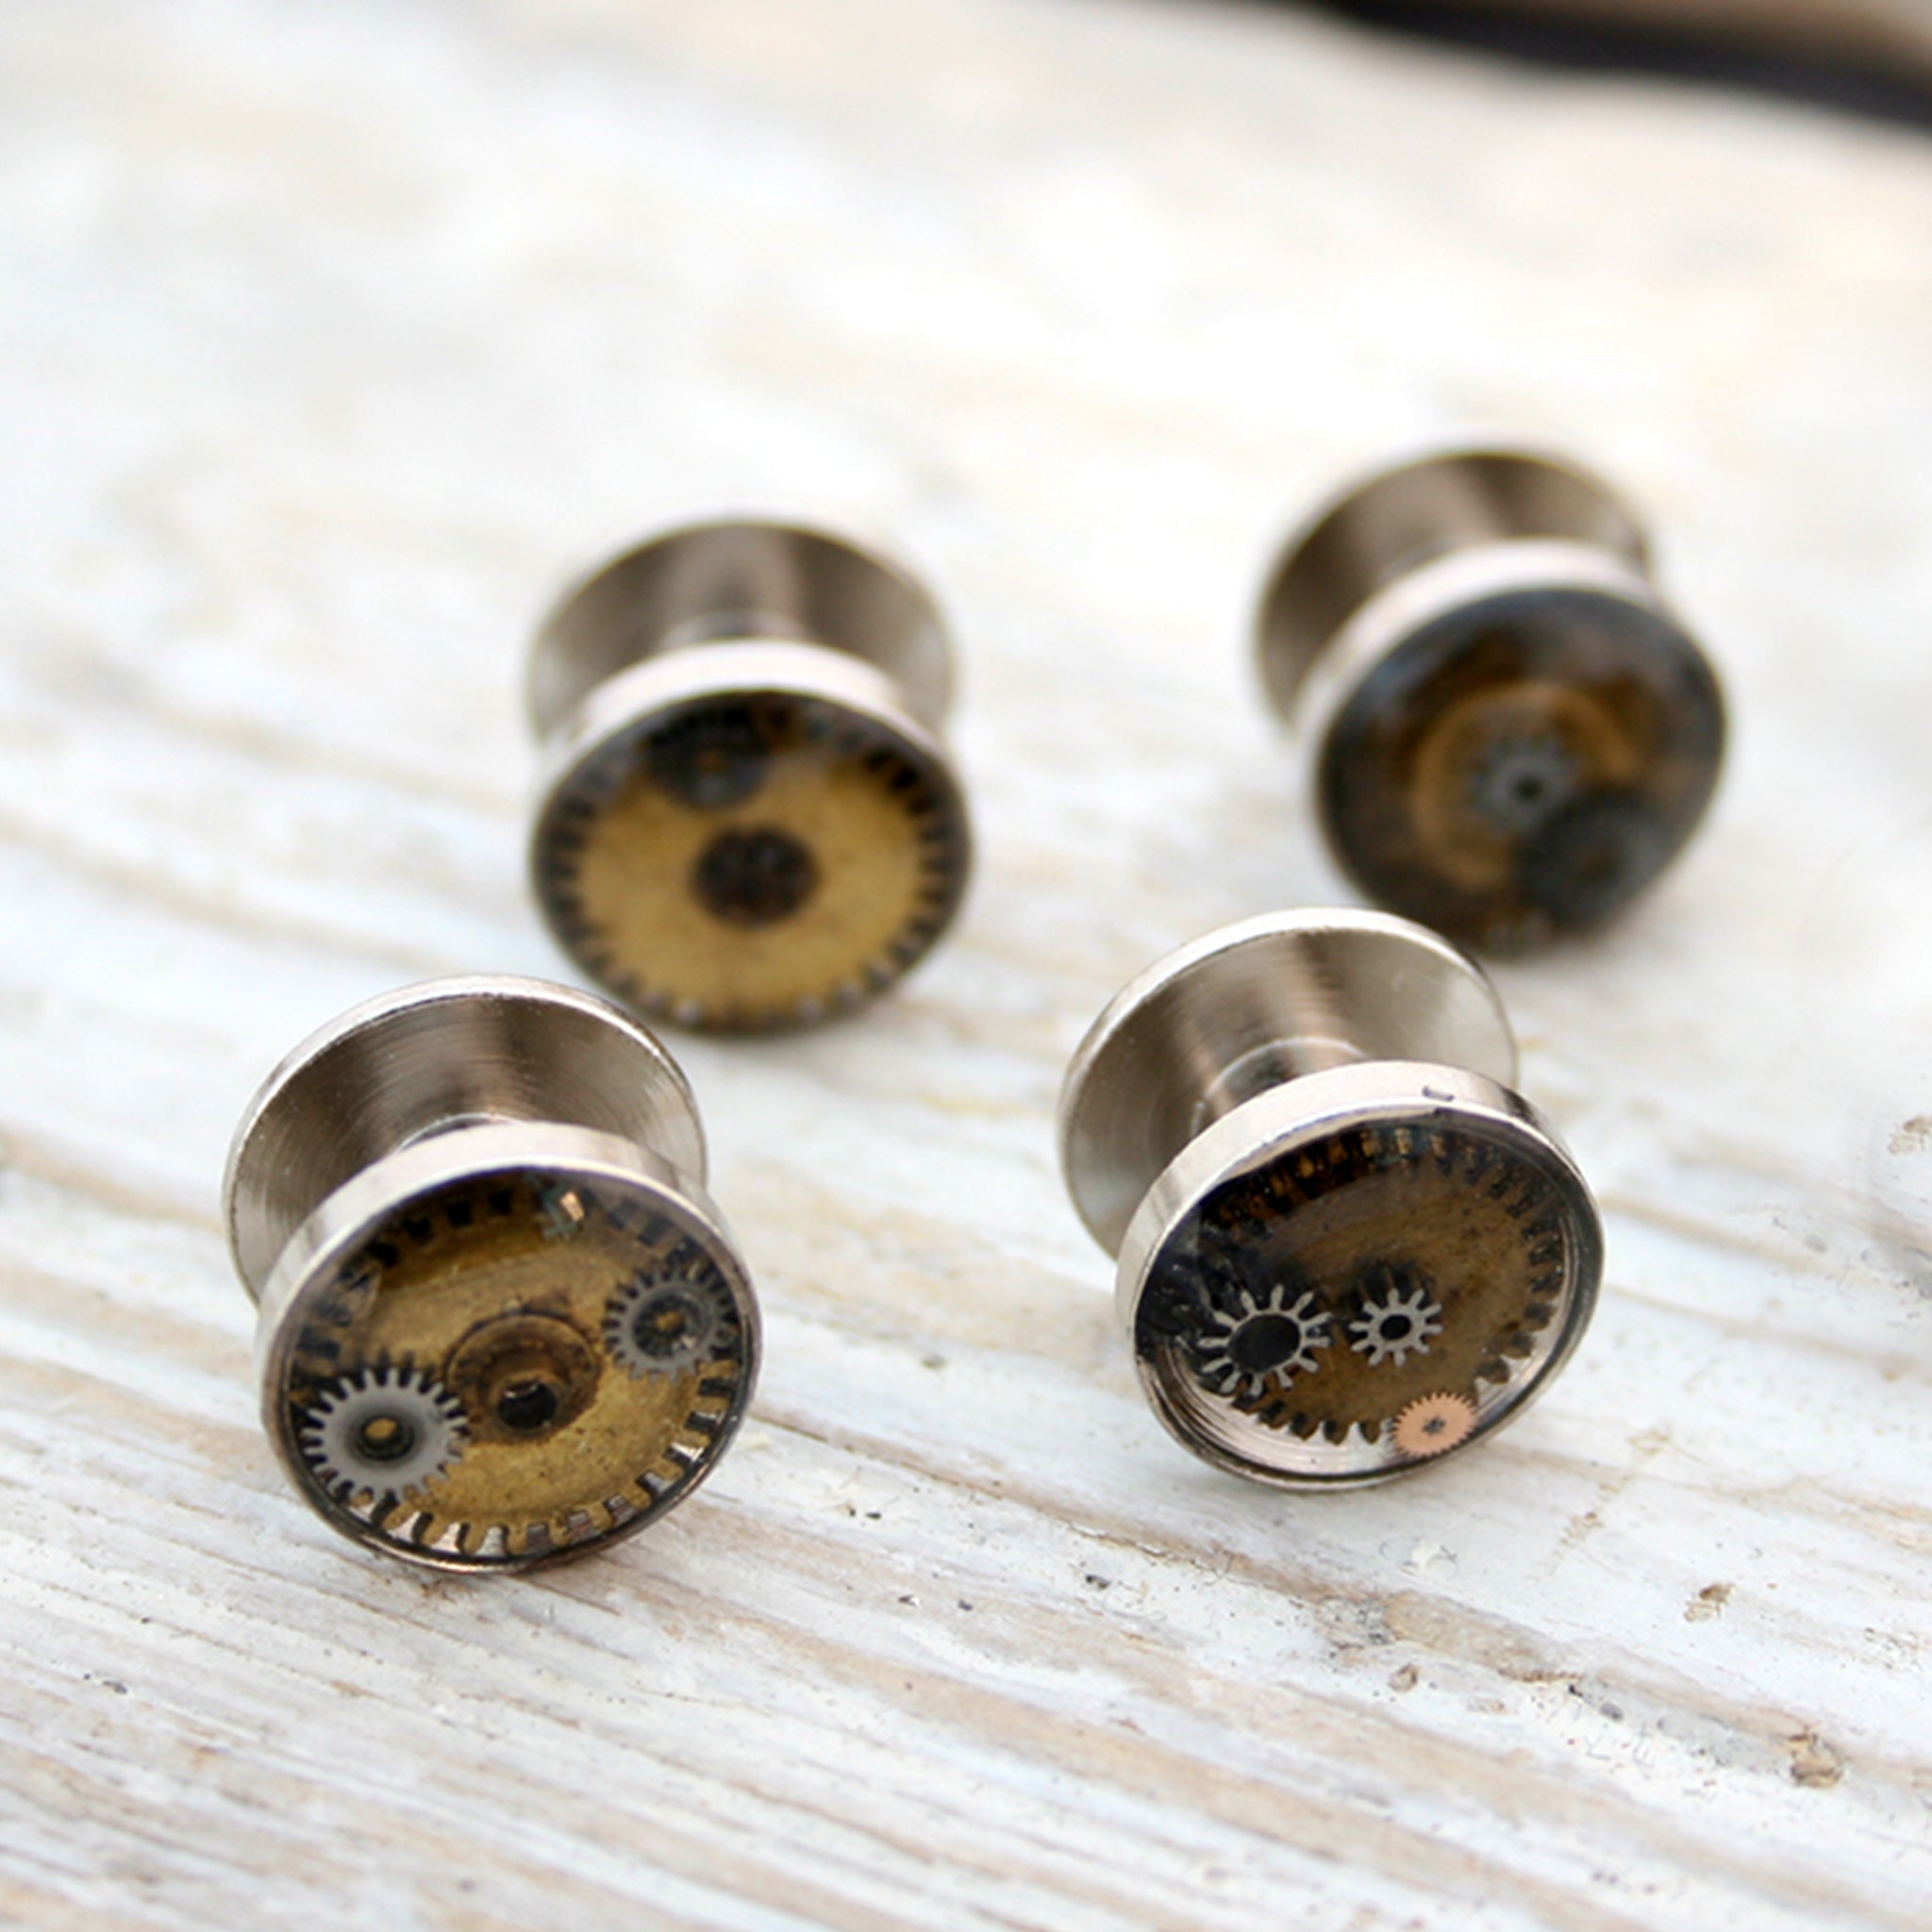 Silver tone tuxedo studs featuring vintage watch parts filled with resin